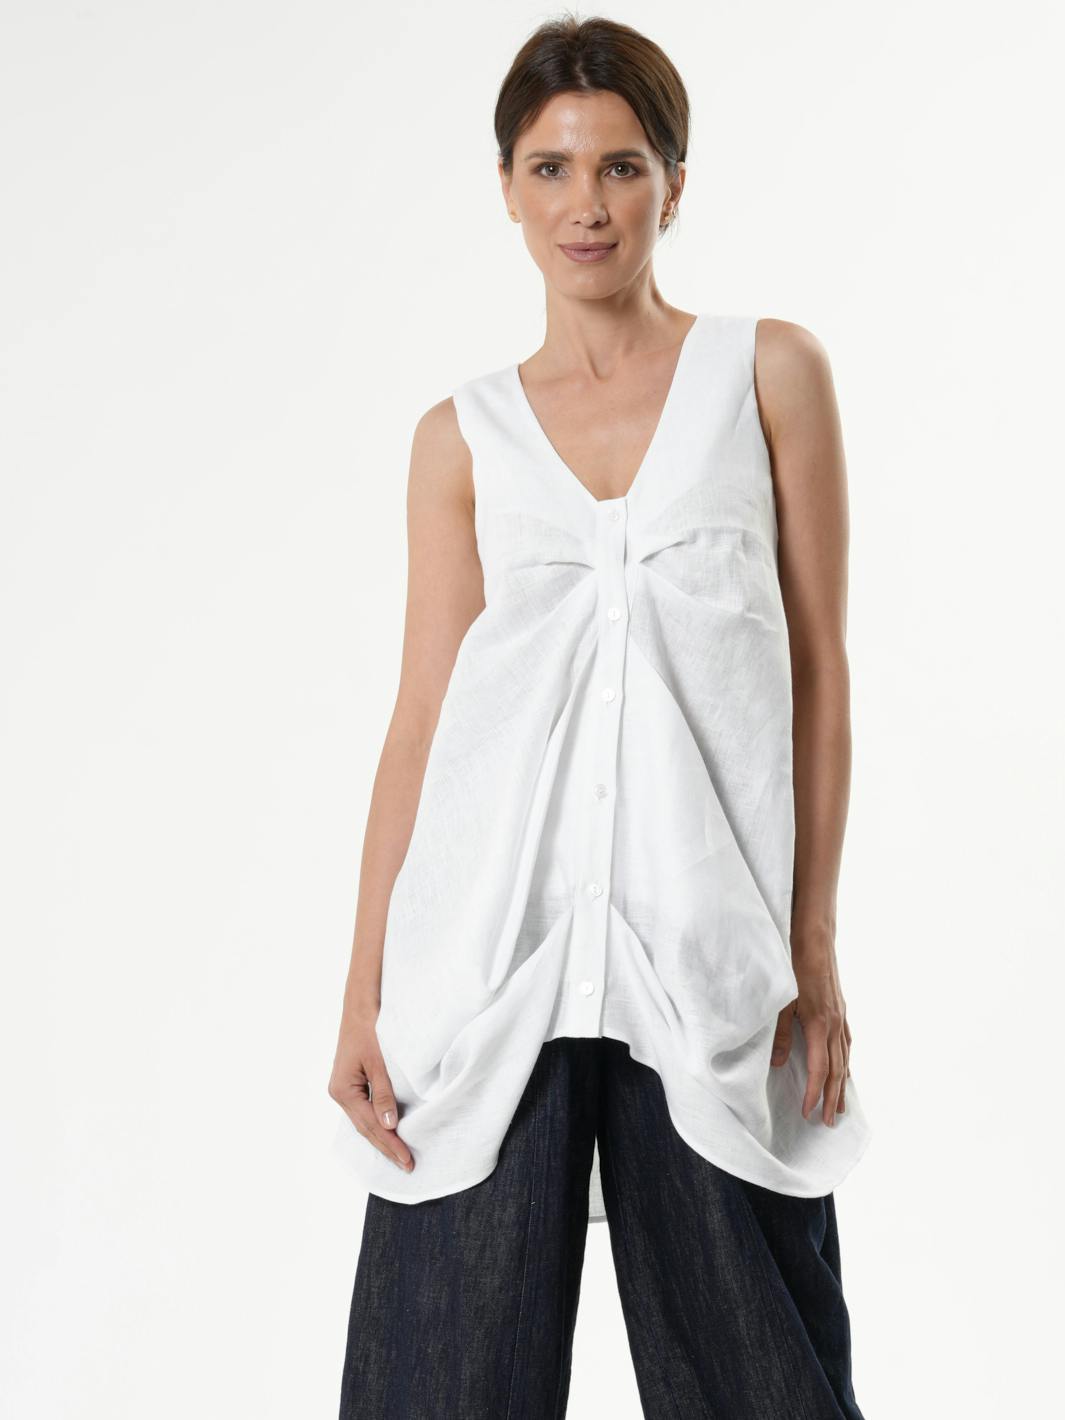 Linen Tunic Top With Buttons , a product by METAMORPHOZA